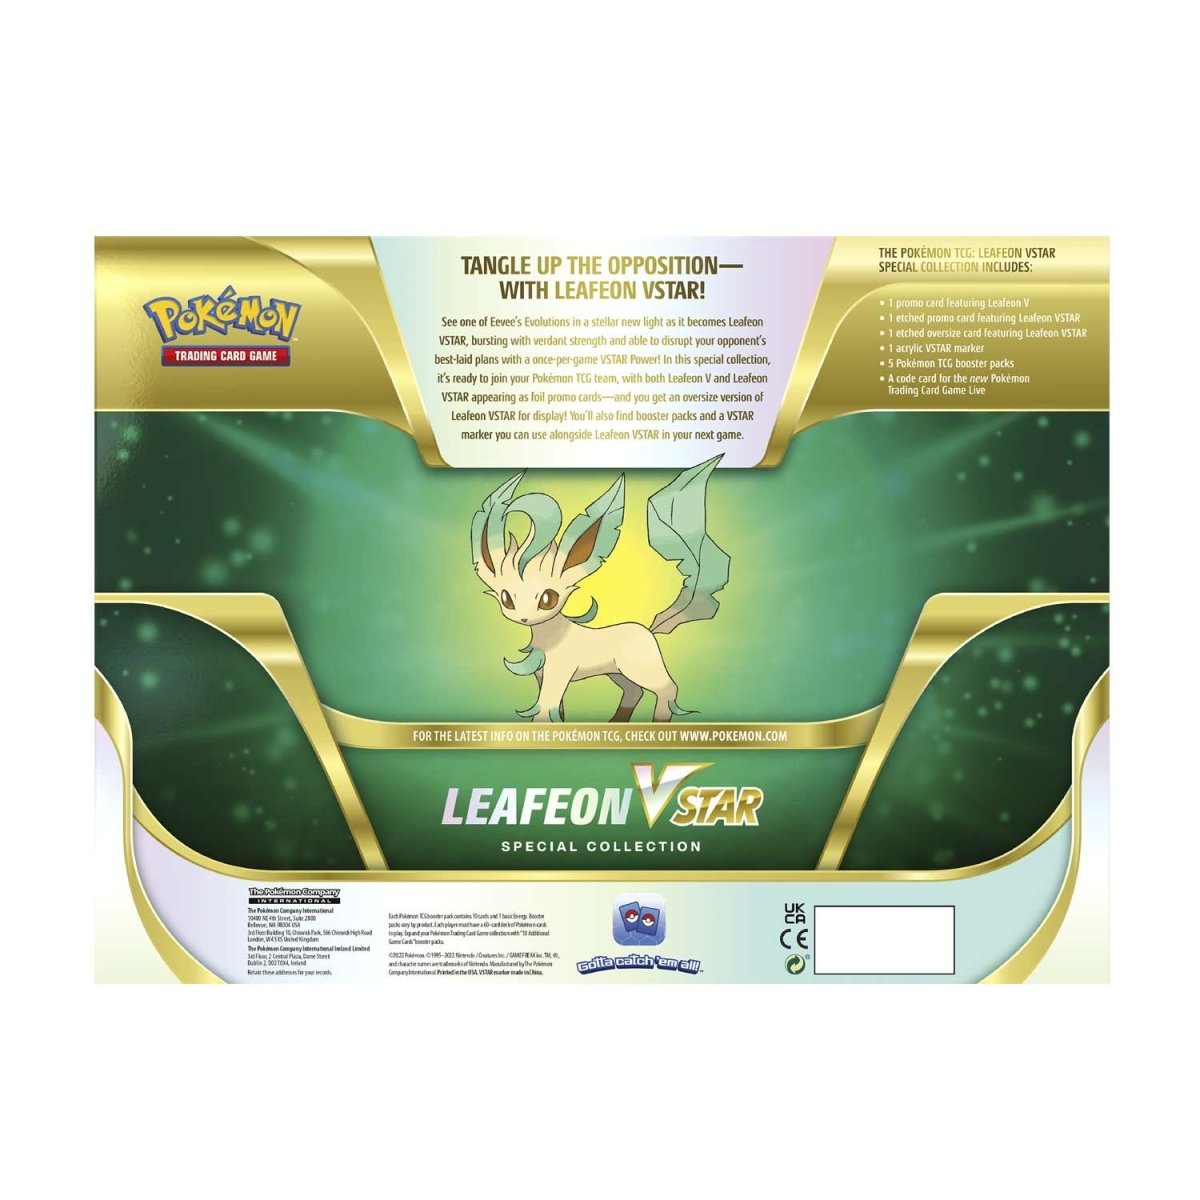 Pokemon Platinum - How to get Eevee & evolve it into Leafeon or Glaceon 